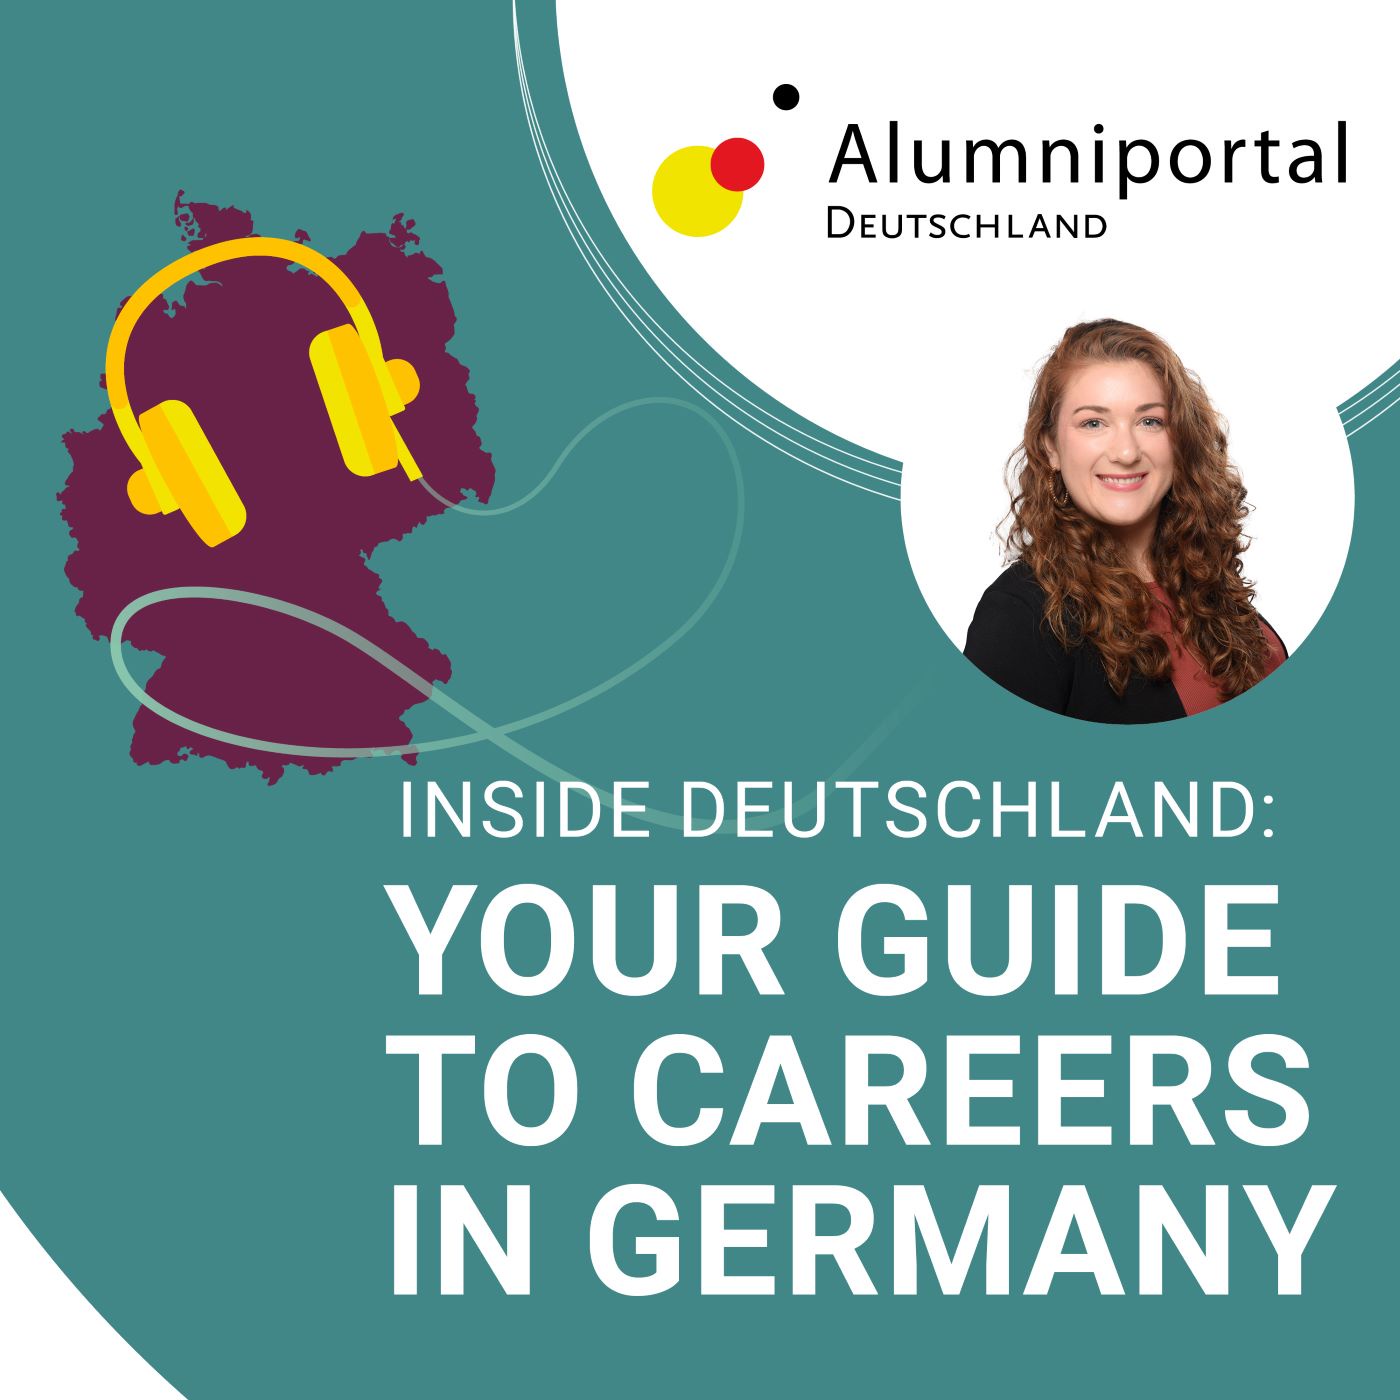 Inside Deutschland: Your Guide to Careers in Germany